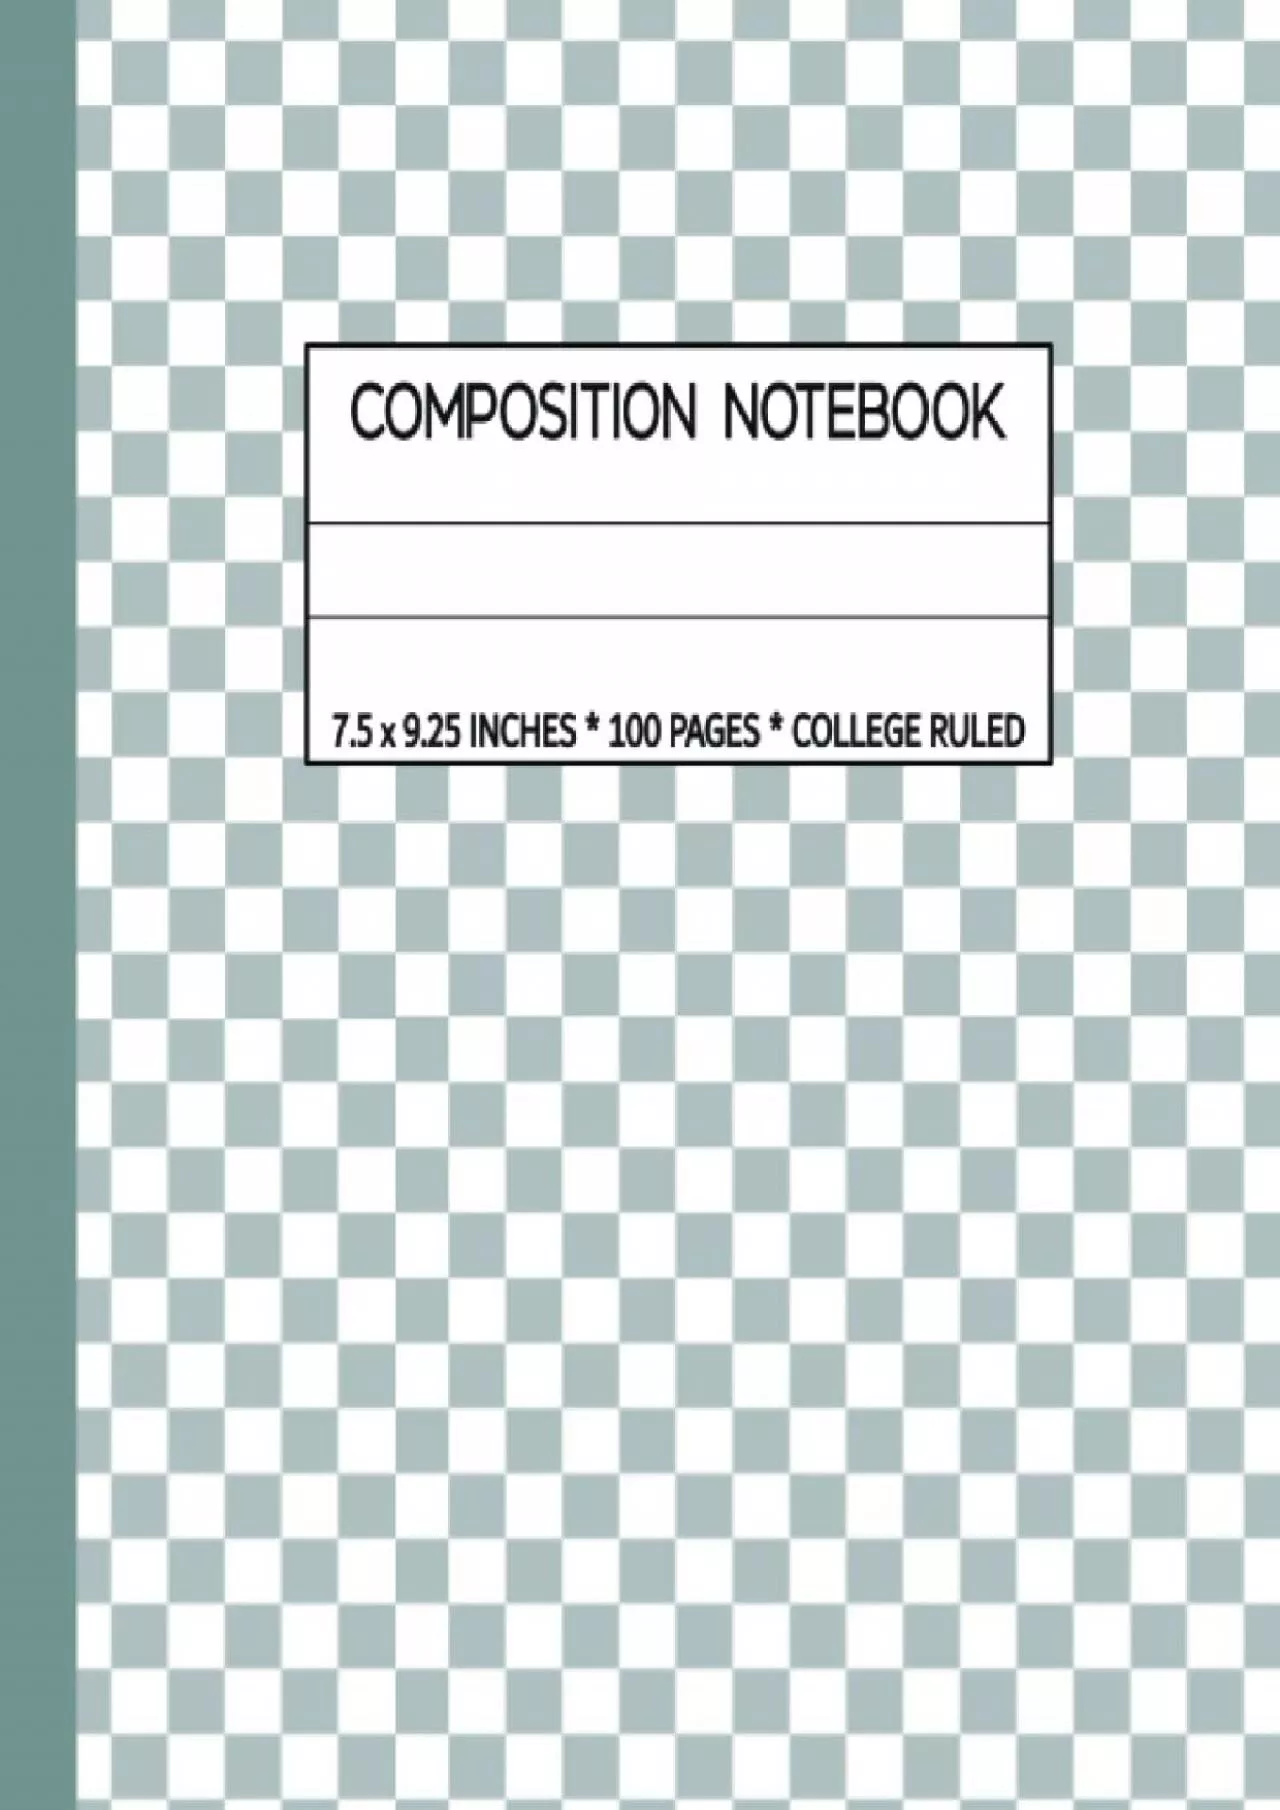 [EBOOK] College Ruled Composition Notebook: Blue Checkered Writing Journal . School Supplies